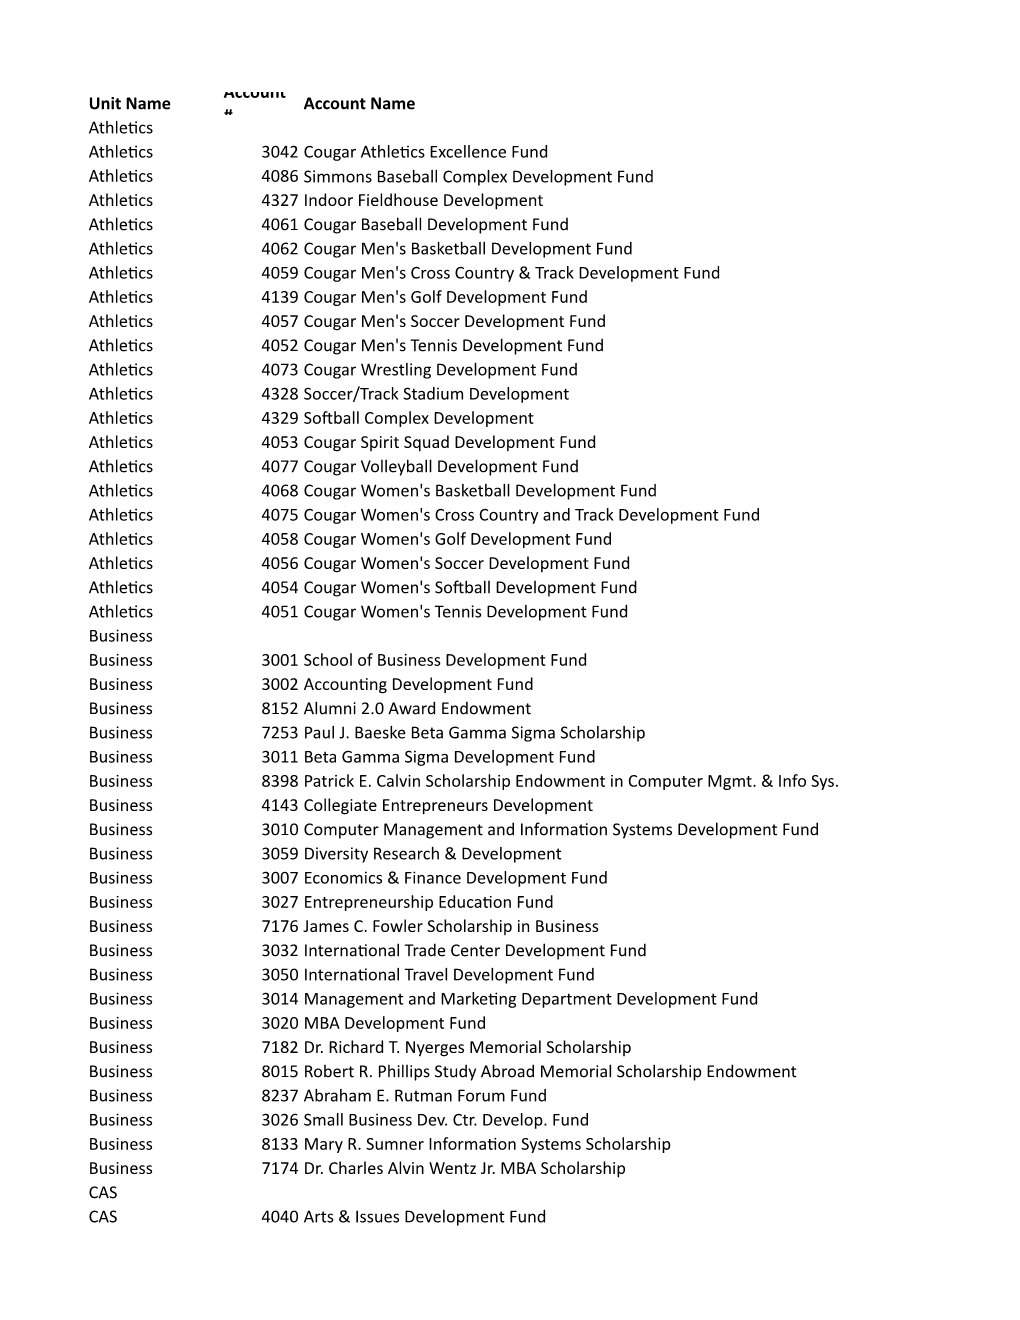 SIUE Day Fund List Complete FY13-FY14.Xlsx